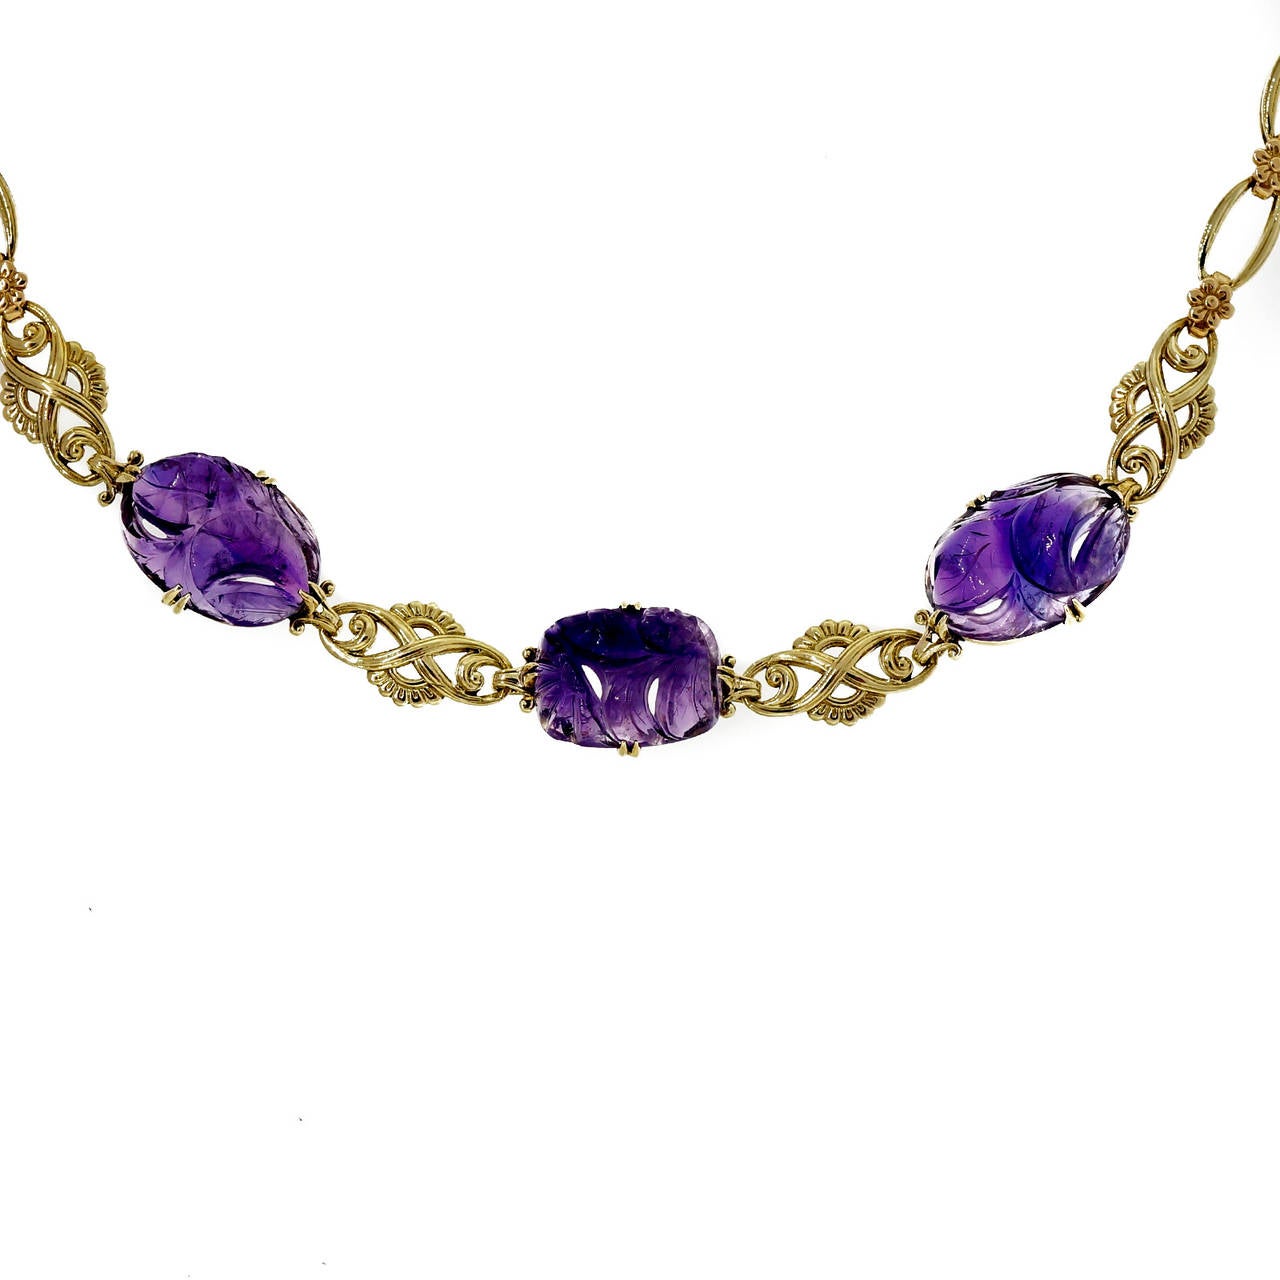 Retro late Art Deco 1940's 14k slightly greenish gold necklace with carved natural untreated Amethyst separated by scroll link sections.

14k yellow gold
3 purple carved translucent Amethyst Quartz, approx. total weight 22.00cts, 17.5 x 12mm,